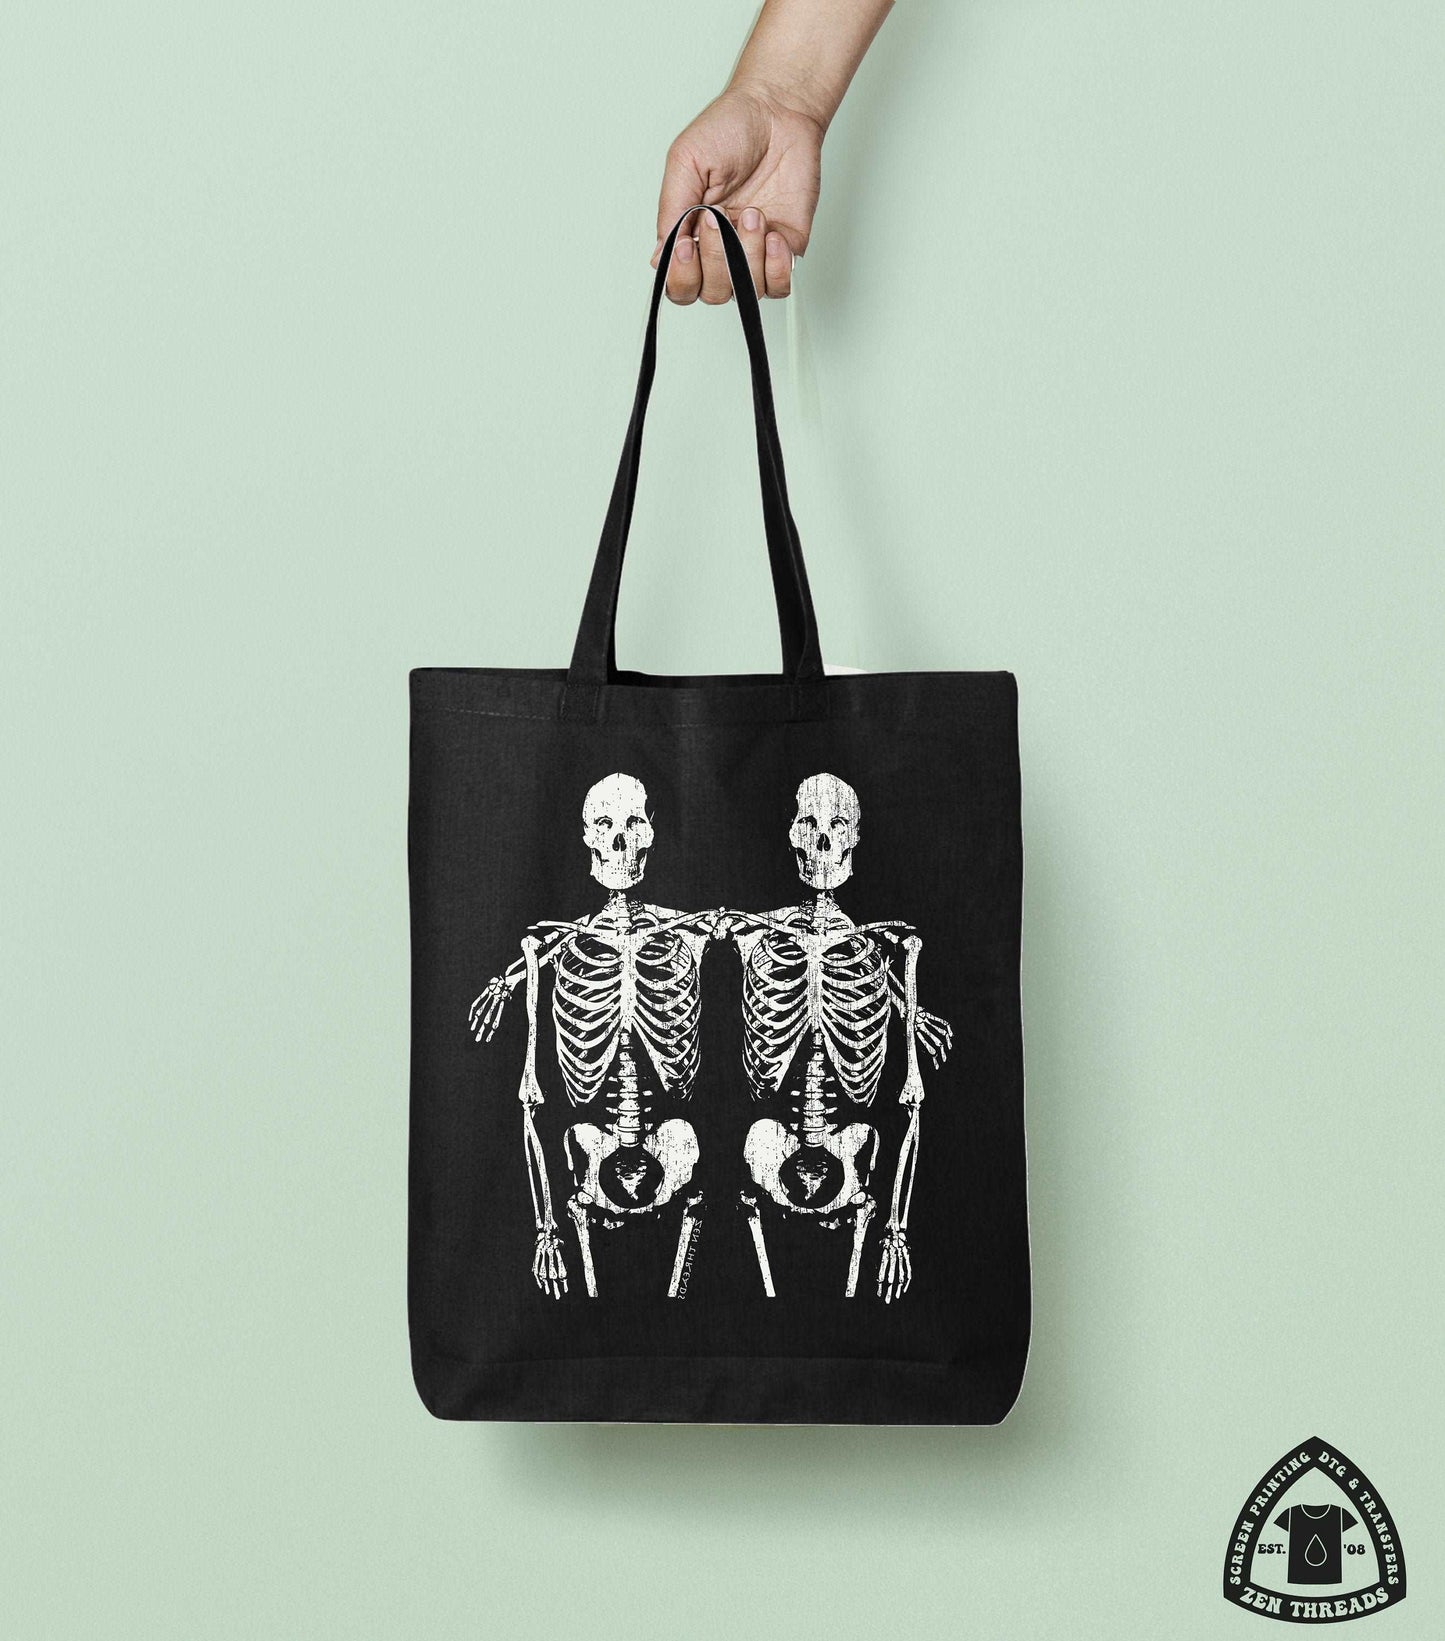 SKELETON Friends Eco-Friendly Market Tote Bag - Hand Screen printed (Ships FREE!)